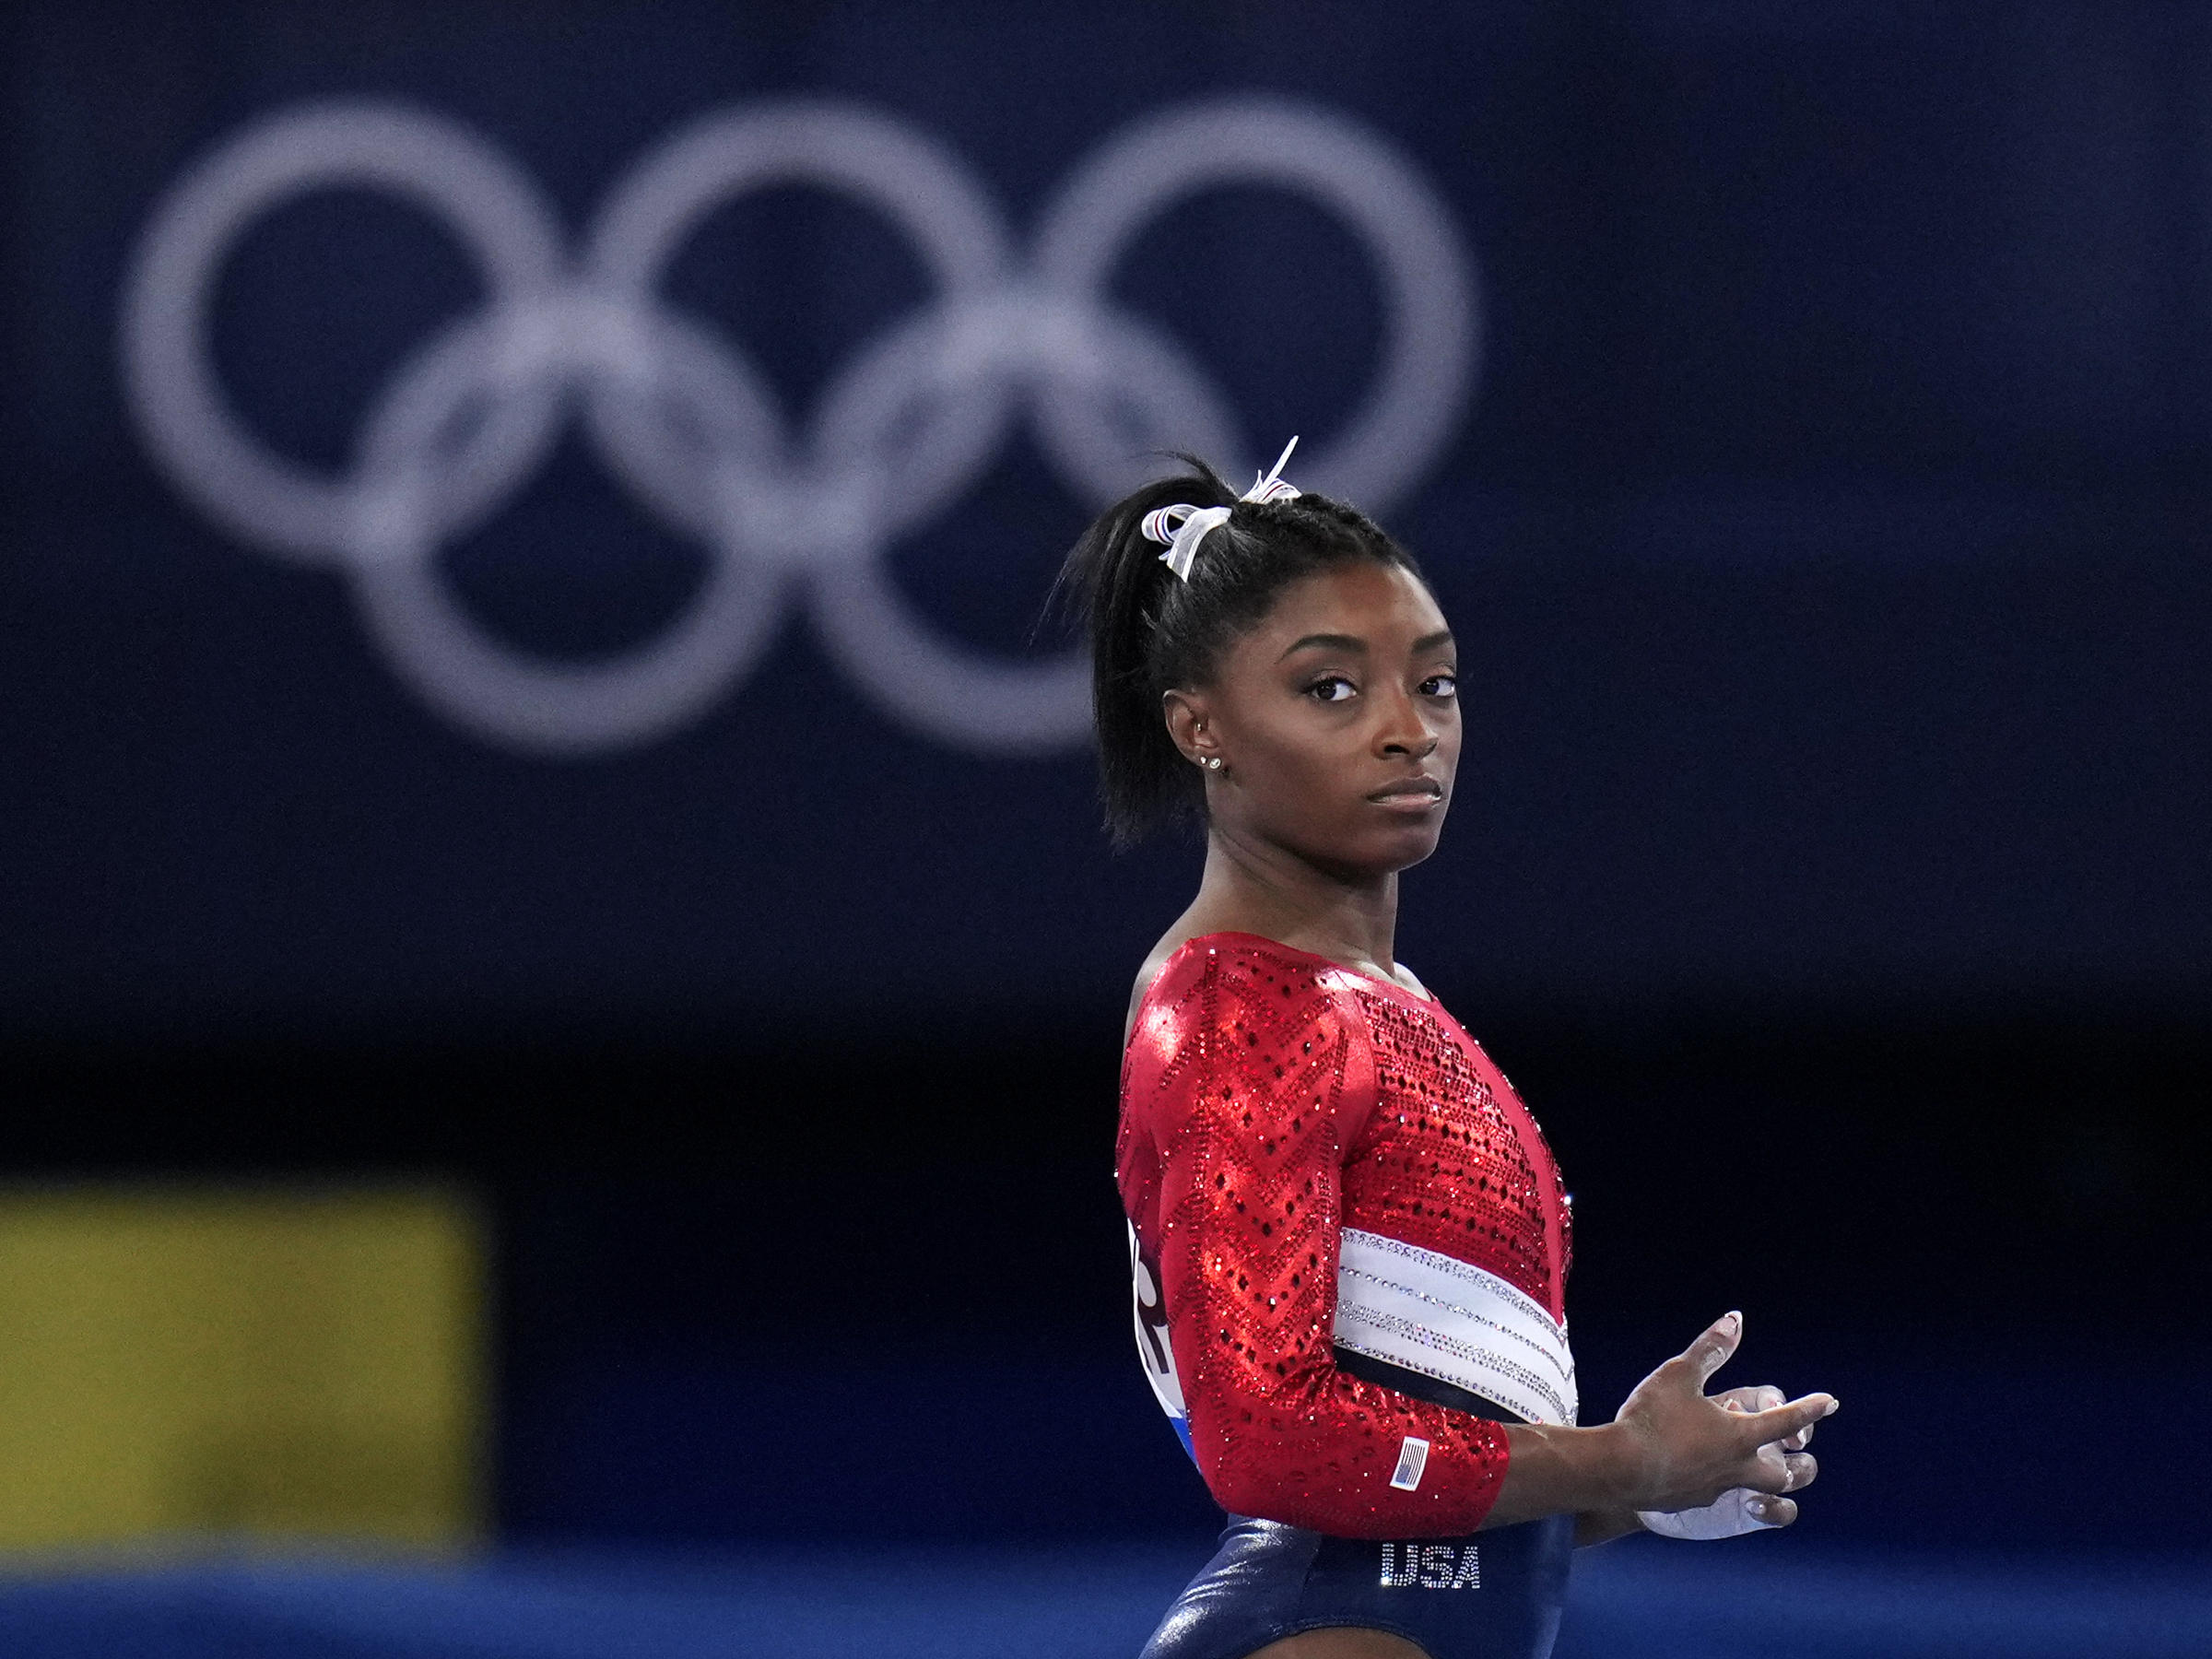 Simone Biles Withdraws From The Vault And Uneven Bars Finals At The